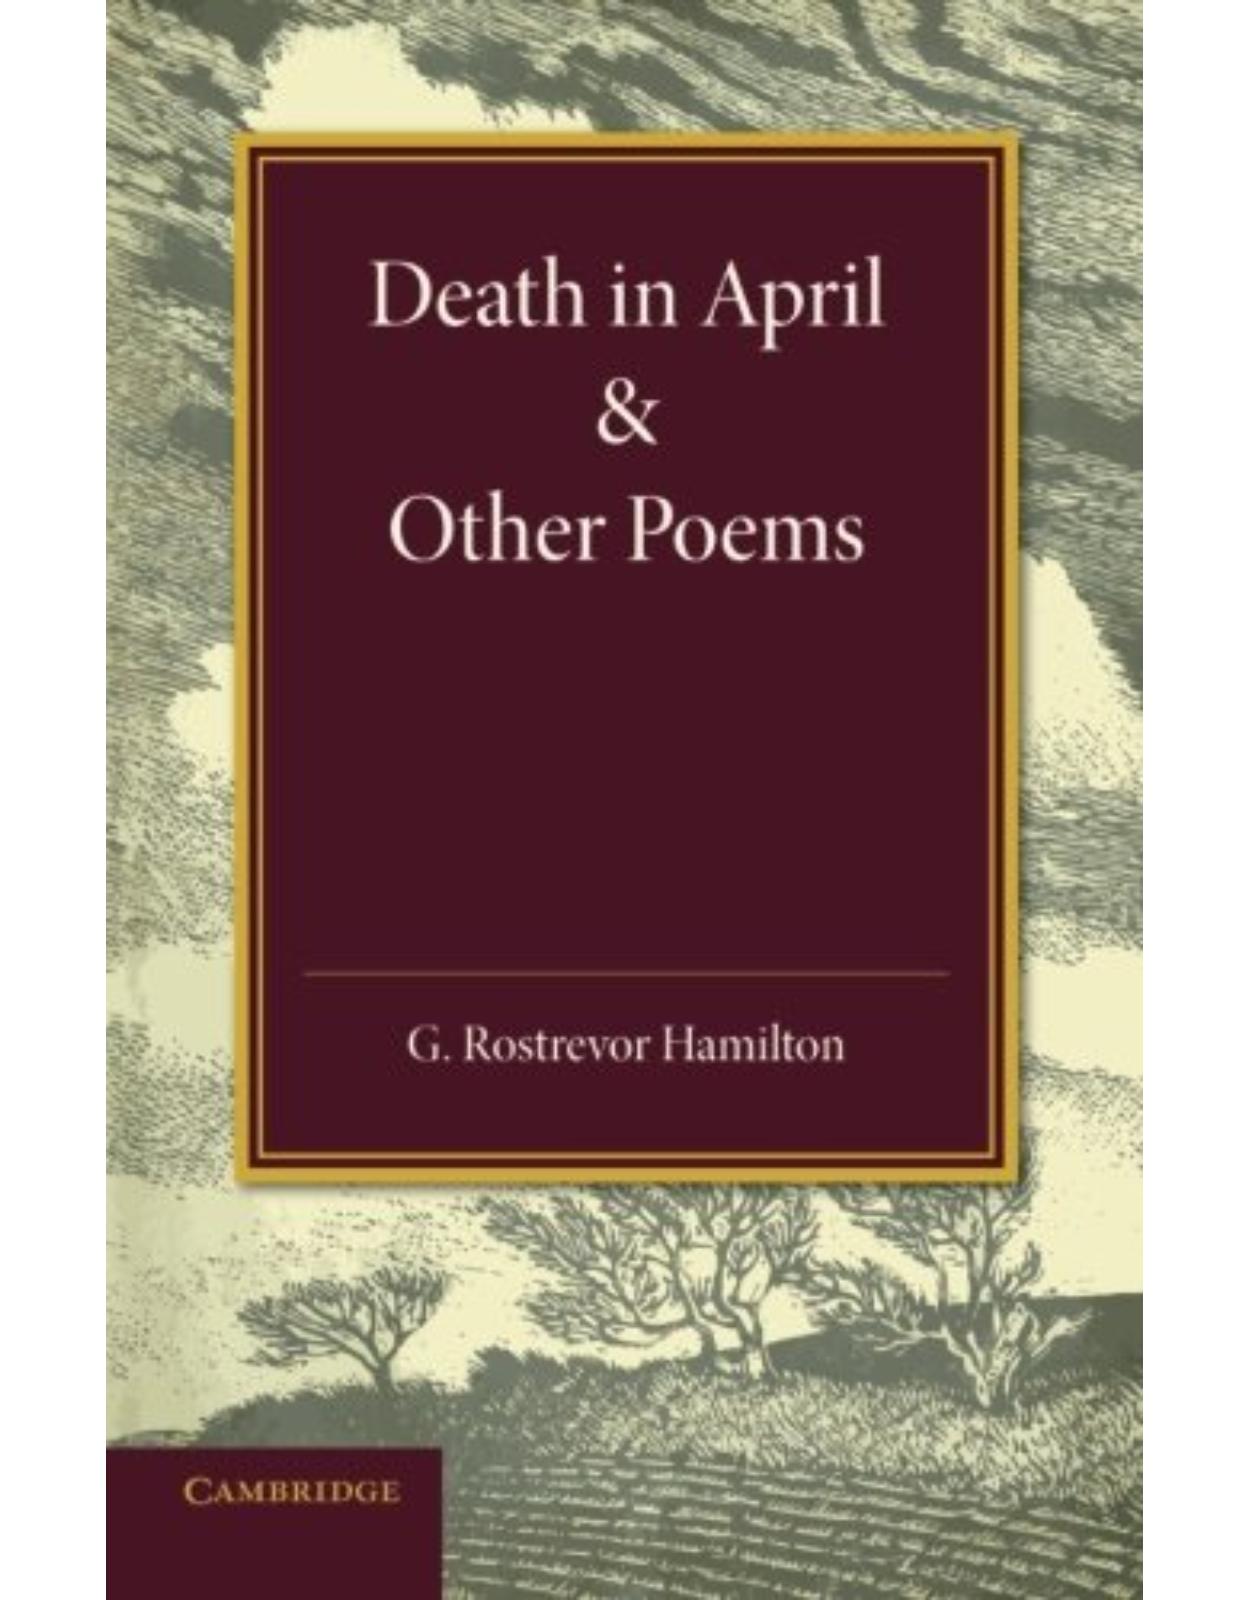 Death in April and Other Poems